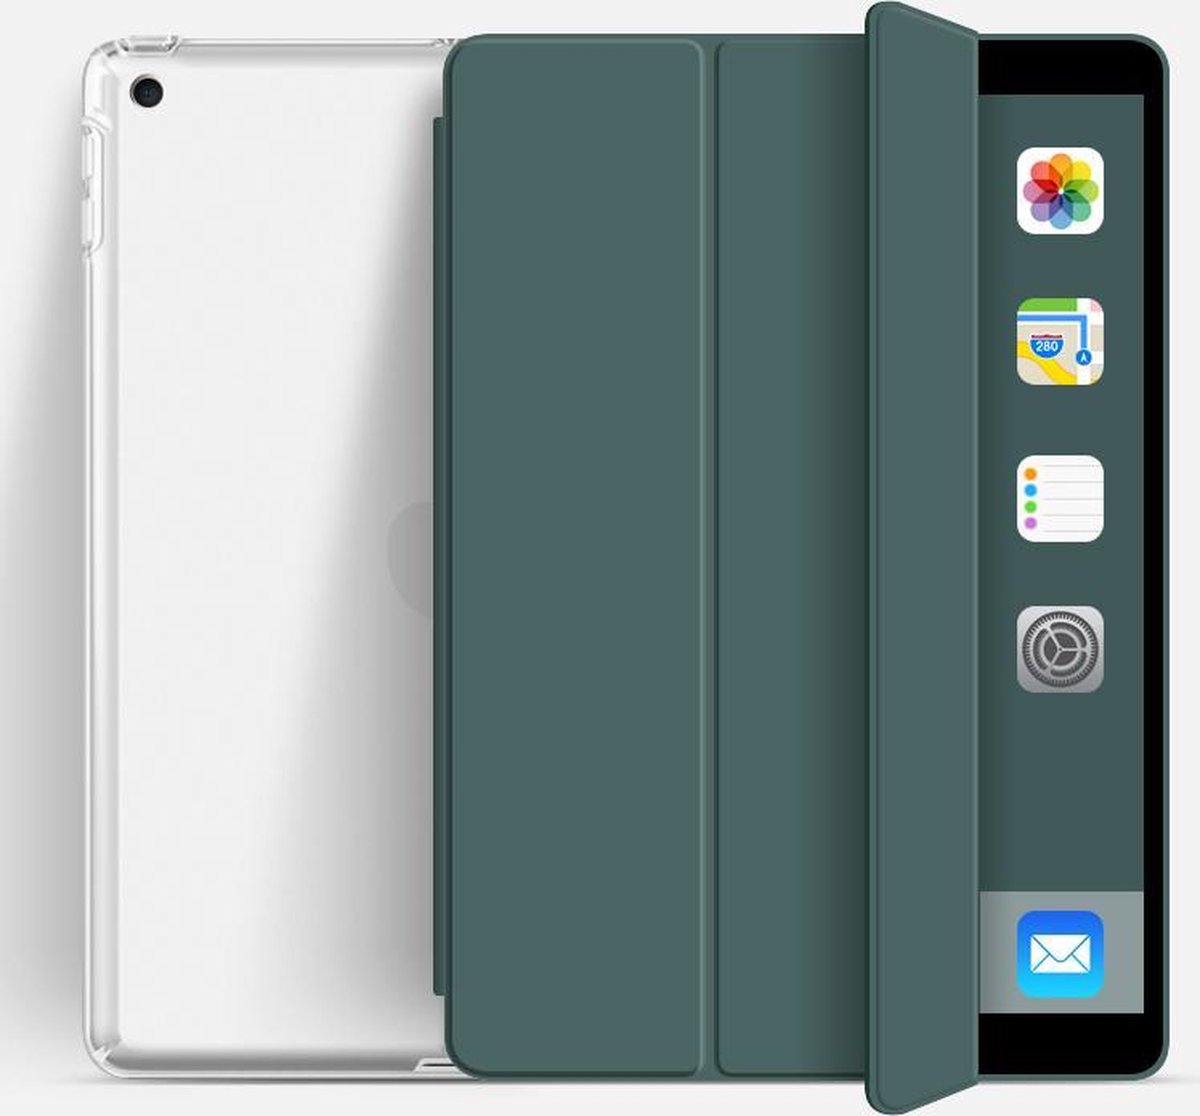 Ipad 7/8 transparant (2019/2020) - 10.2 inch – Ipad hoes – soft cover – Hoes voor iPad – Tablet beschermer - donker groen